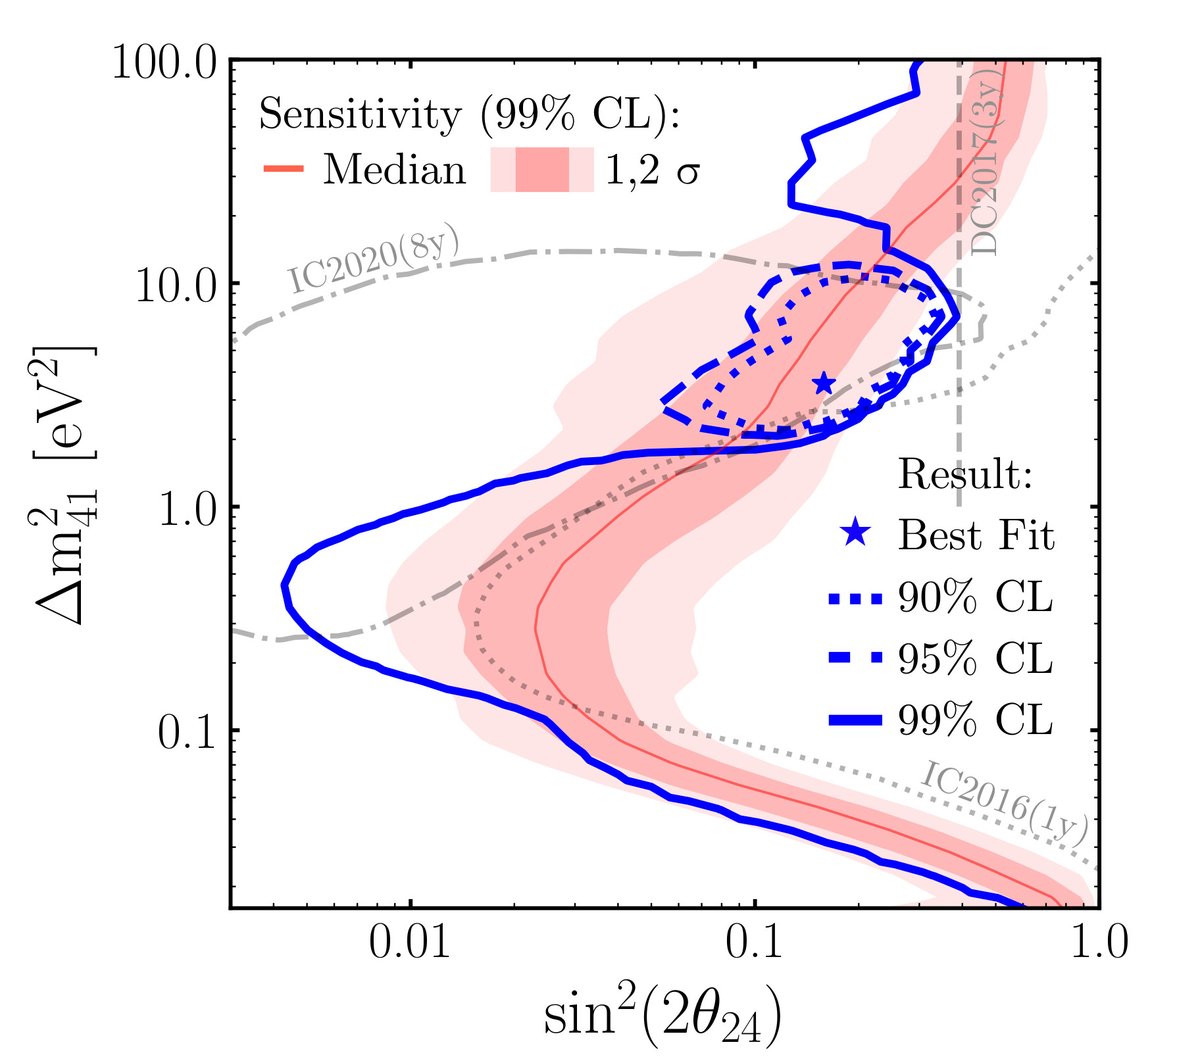 🔔📜 IceCube papers submitted to PRL and PRD! We searched for the sterile neutrino using atmospheric muon neutrinos in the TeV energy range. The results, consistent with our previous findings, do not support the existence of a sterile neutrino. Story ➡️ icecube.wisc.edu/news/research/…